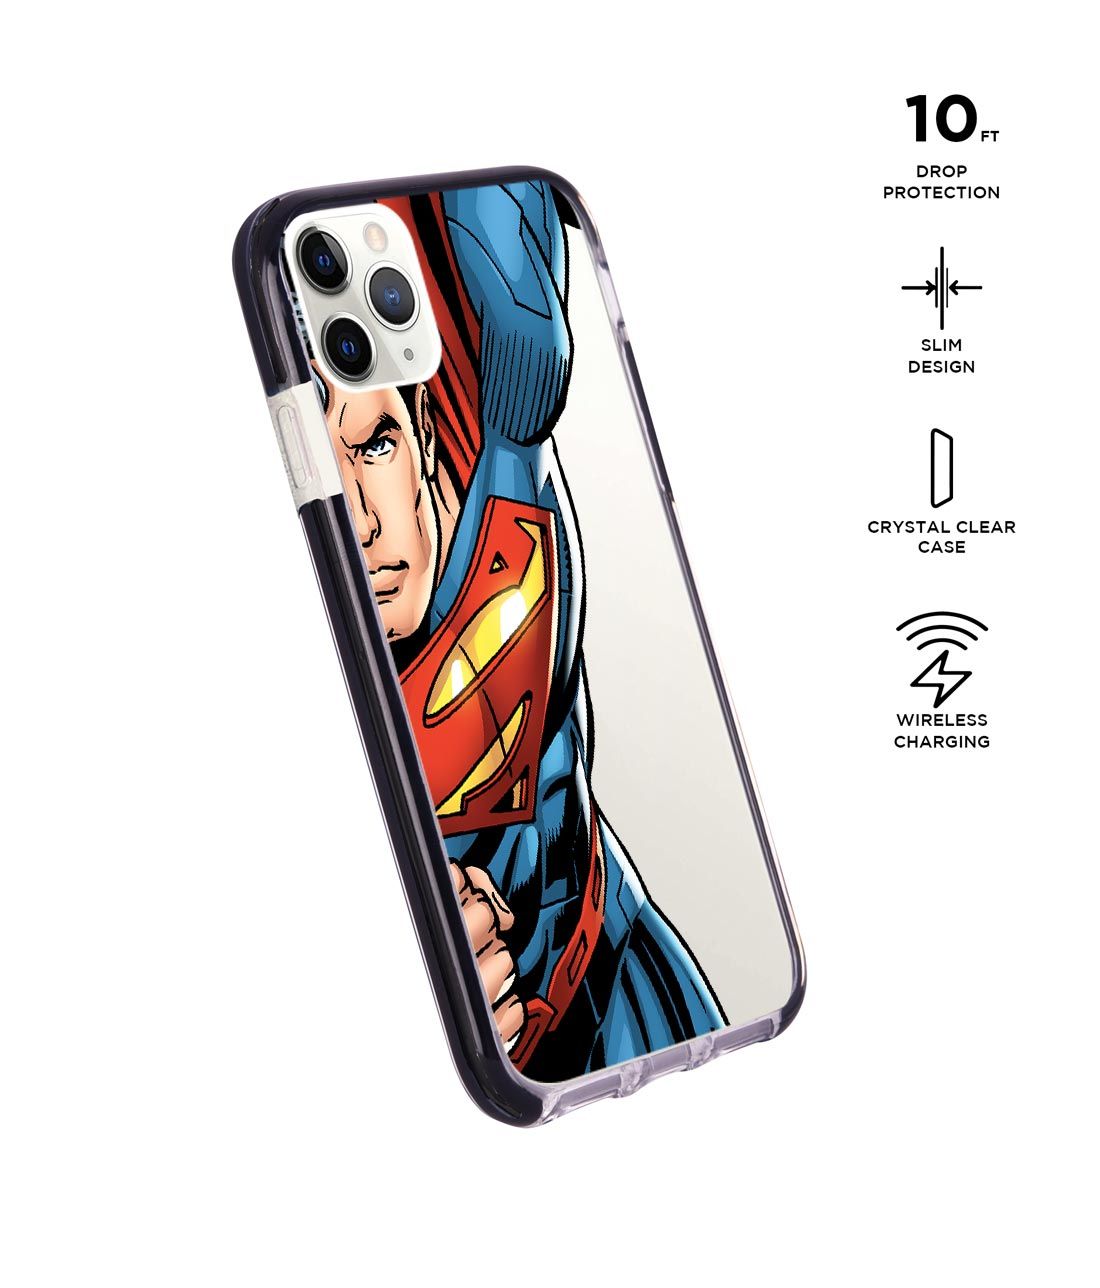 Speed it like Superman - Extreme Phone Case for iPhone 11 Pro